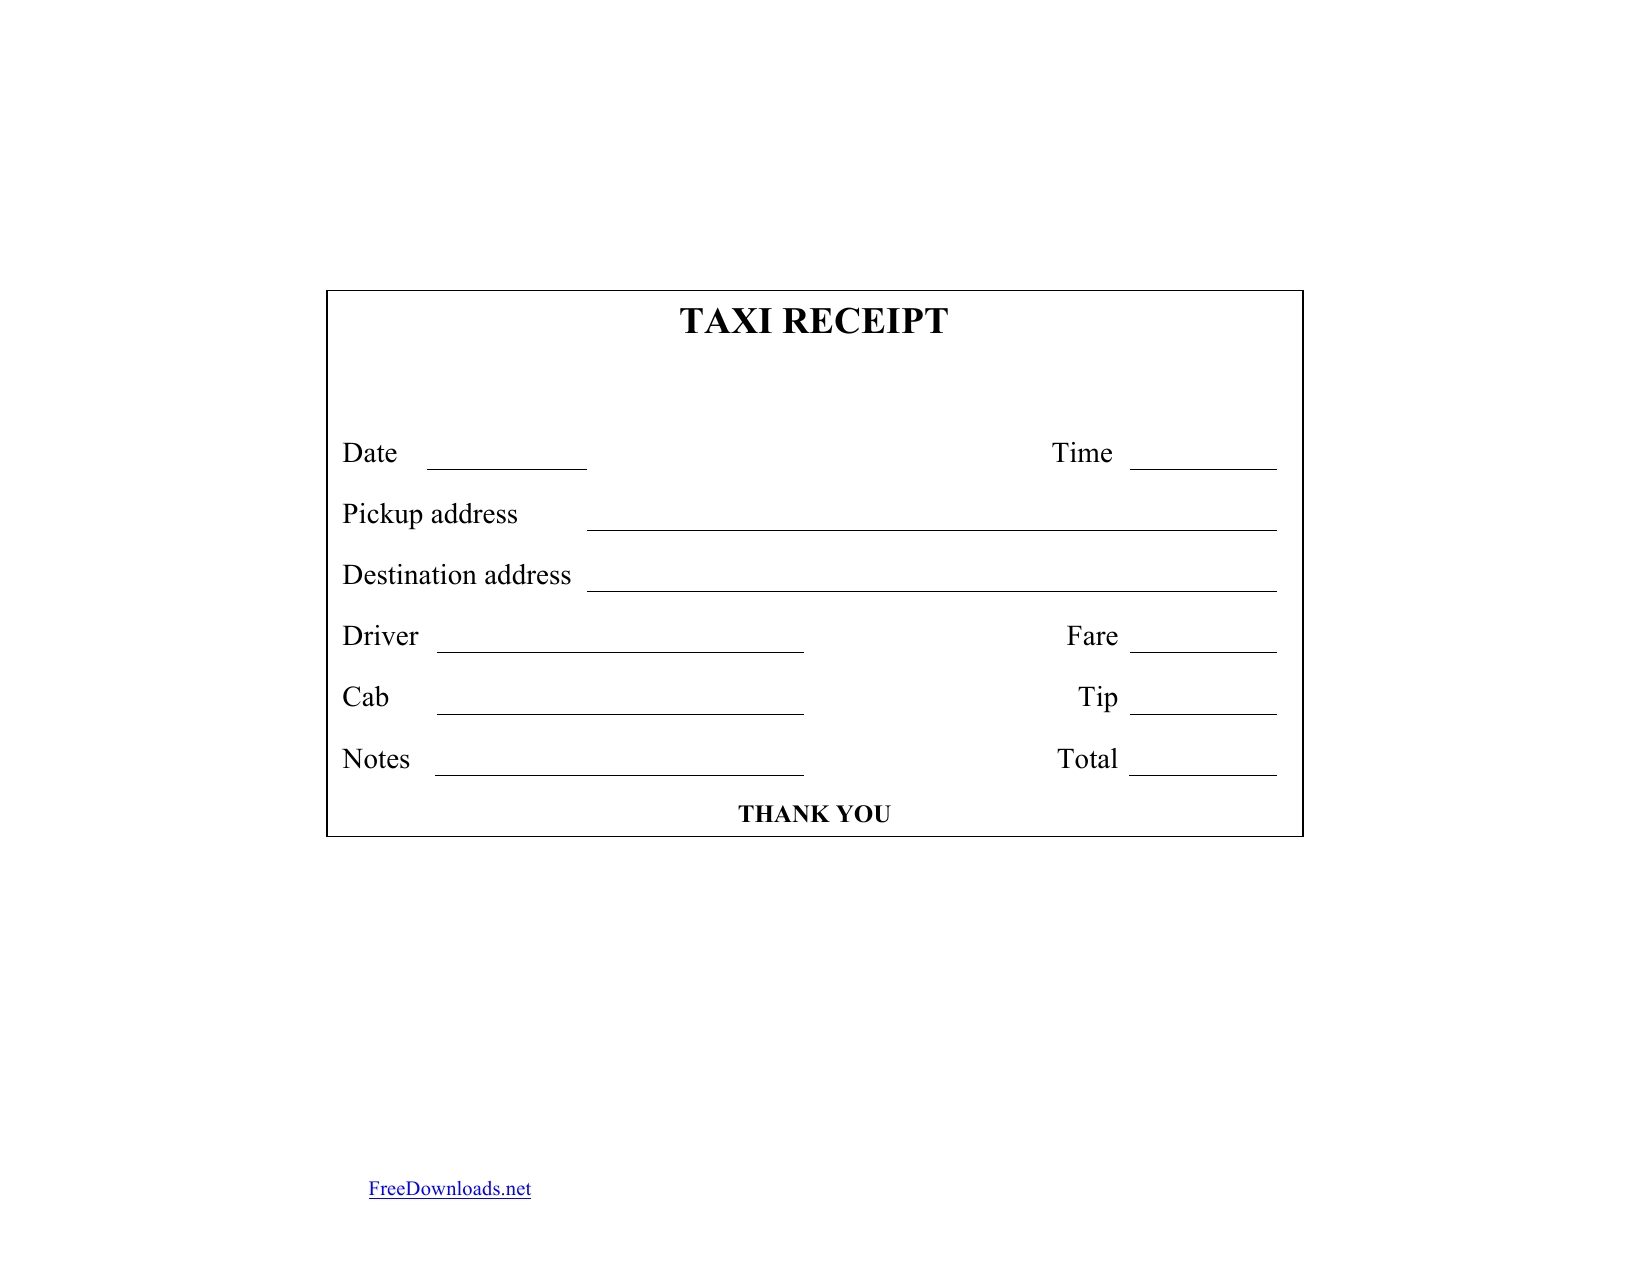 download blank printable taxicab receipt template excel cash receipts format travels jammu